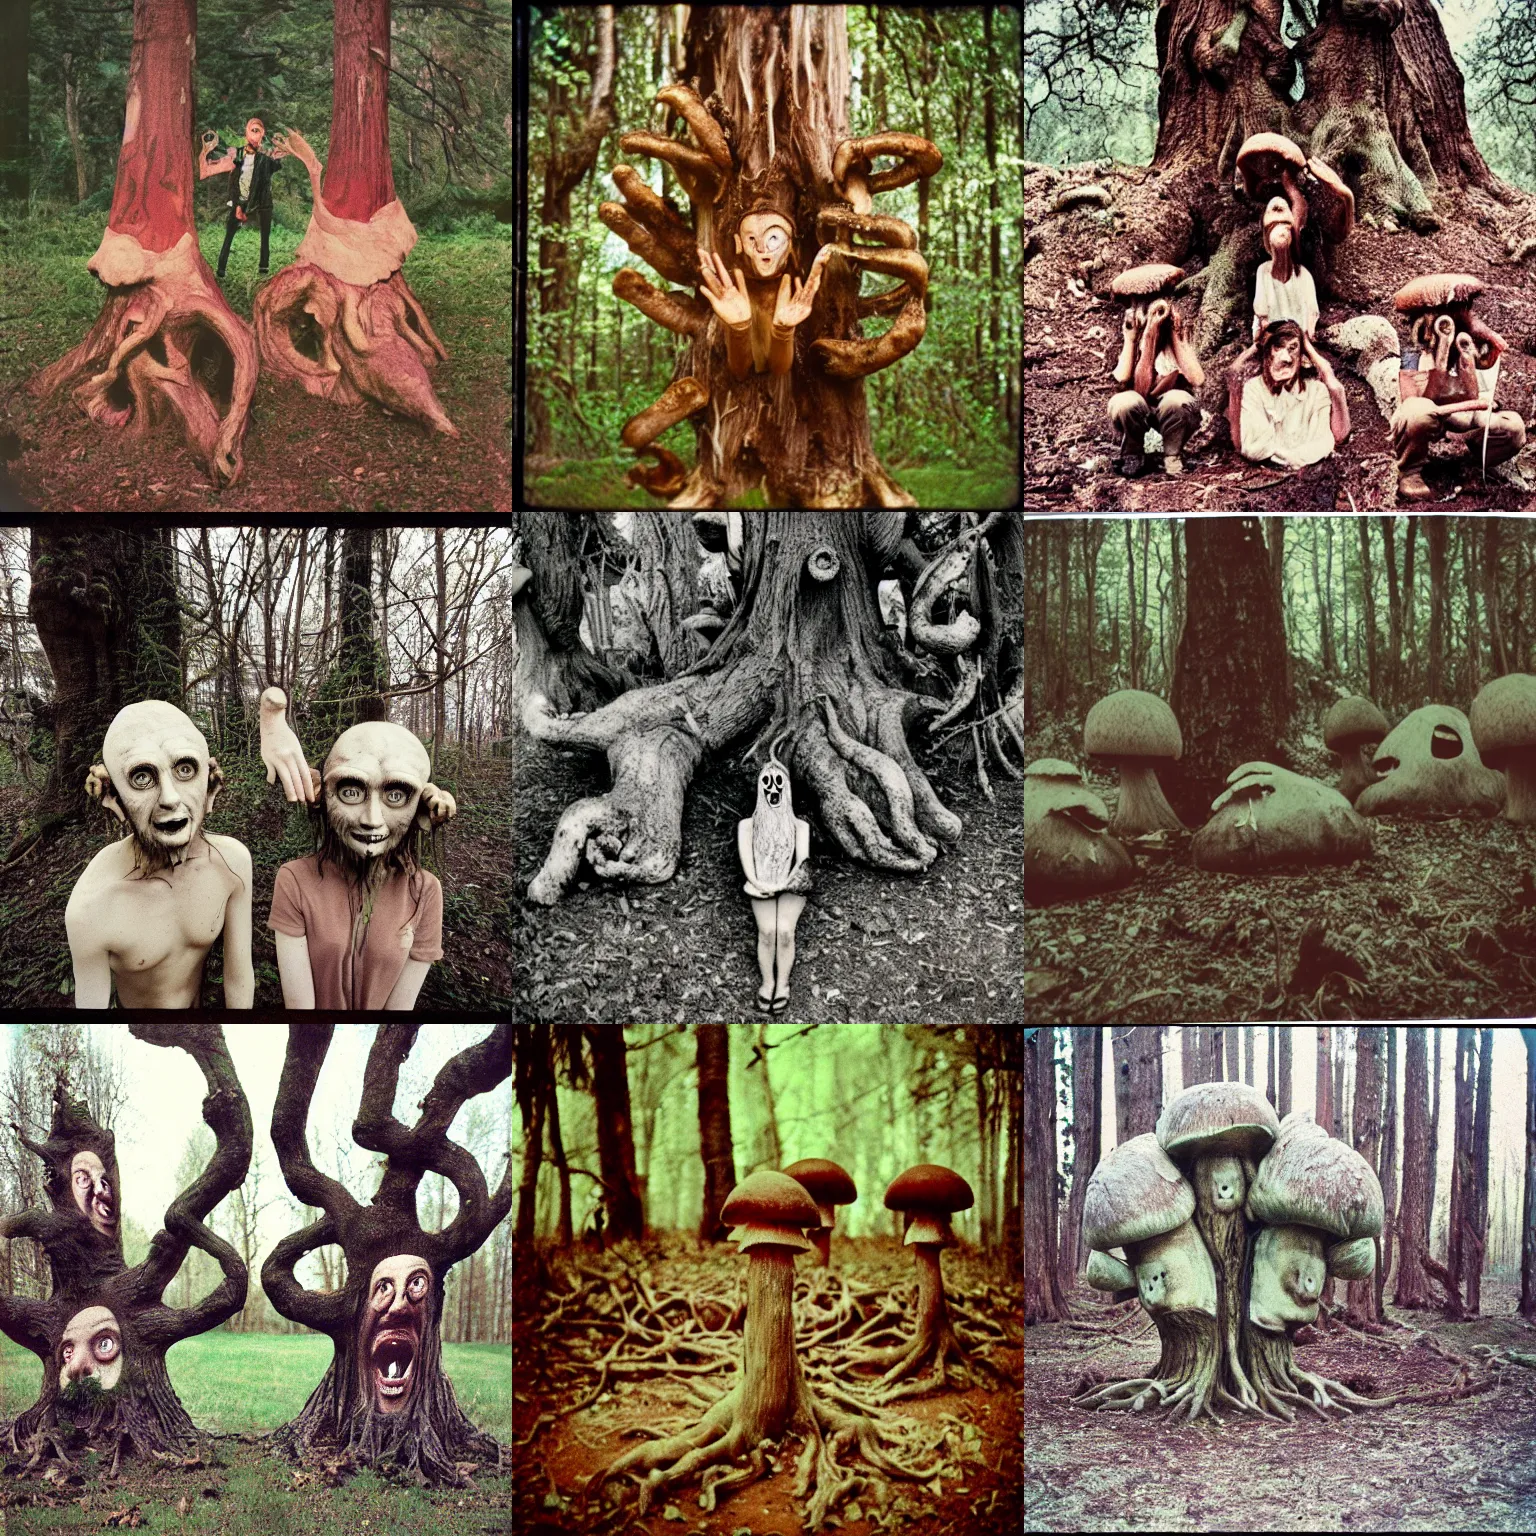 Prompt: eating mushrooms, critical moment, terrifying tree monster with distorted faces made of bark, lovecratftian horror, pans labyrinth, shot on expired instamatic film